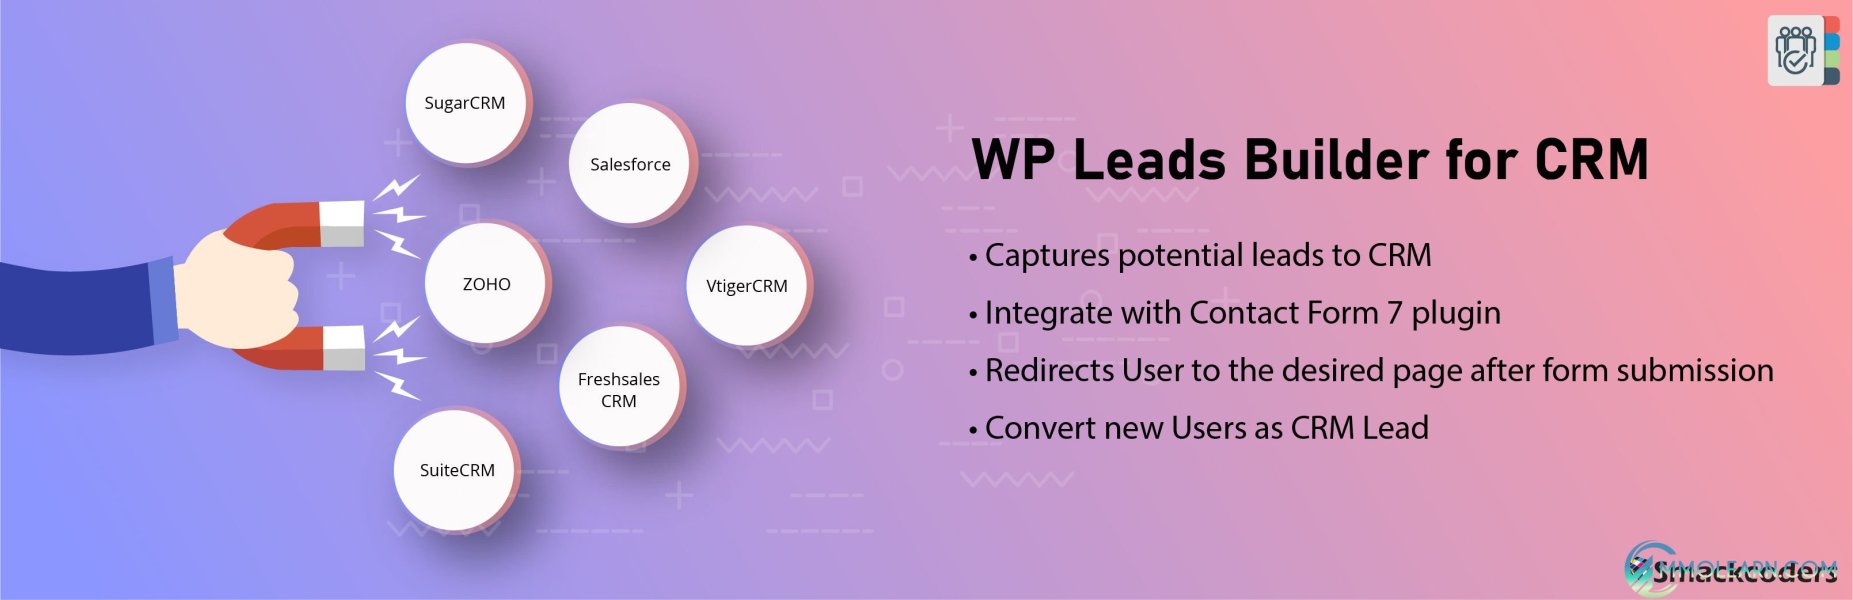 WP Leads Builder for CRM